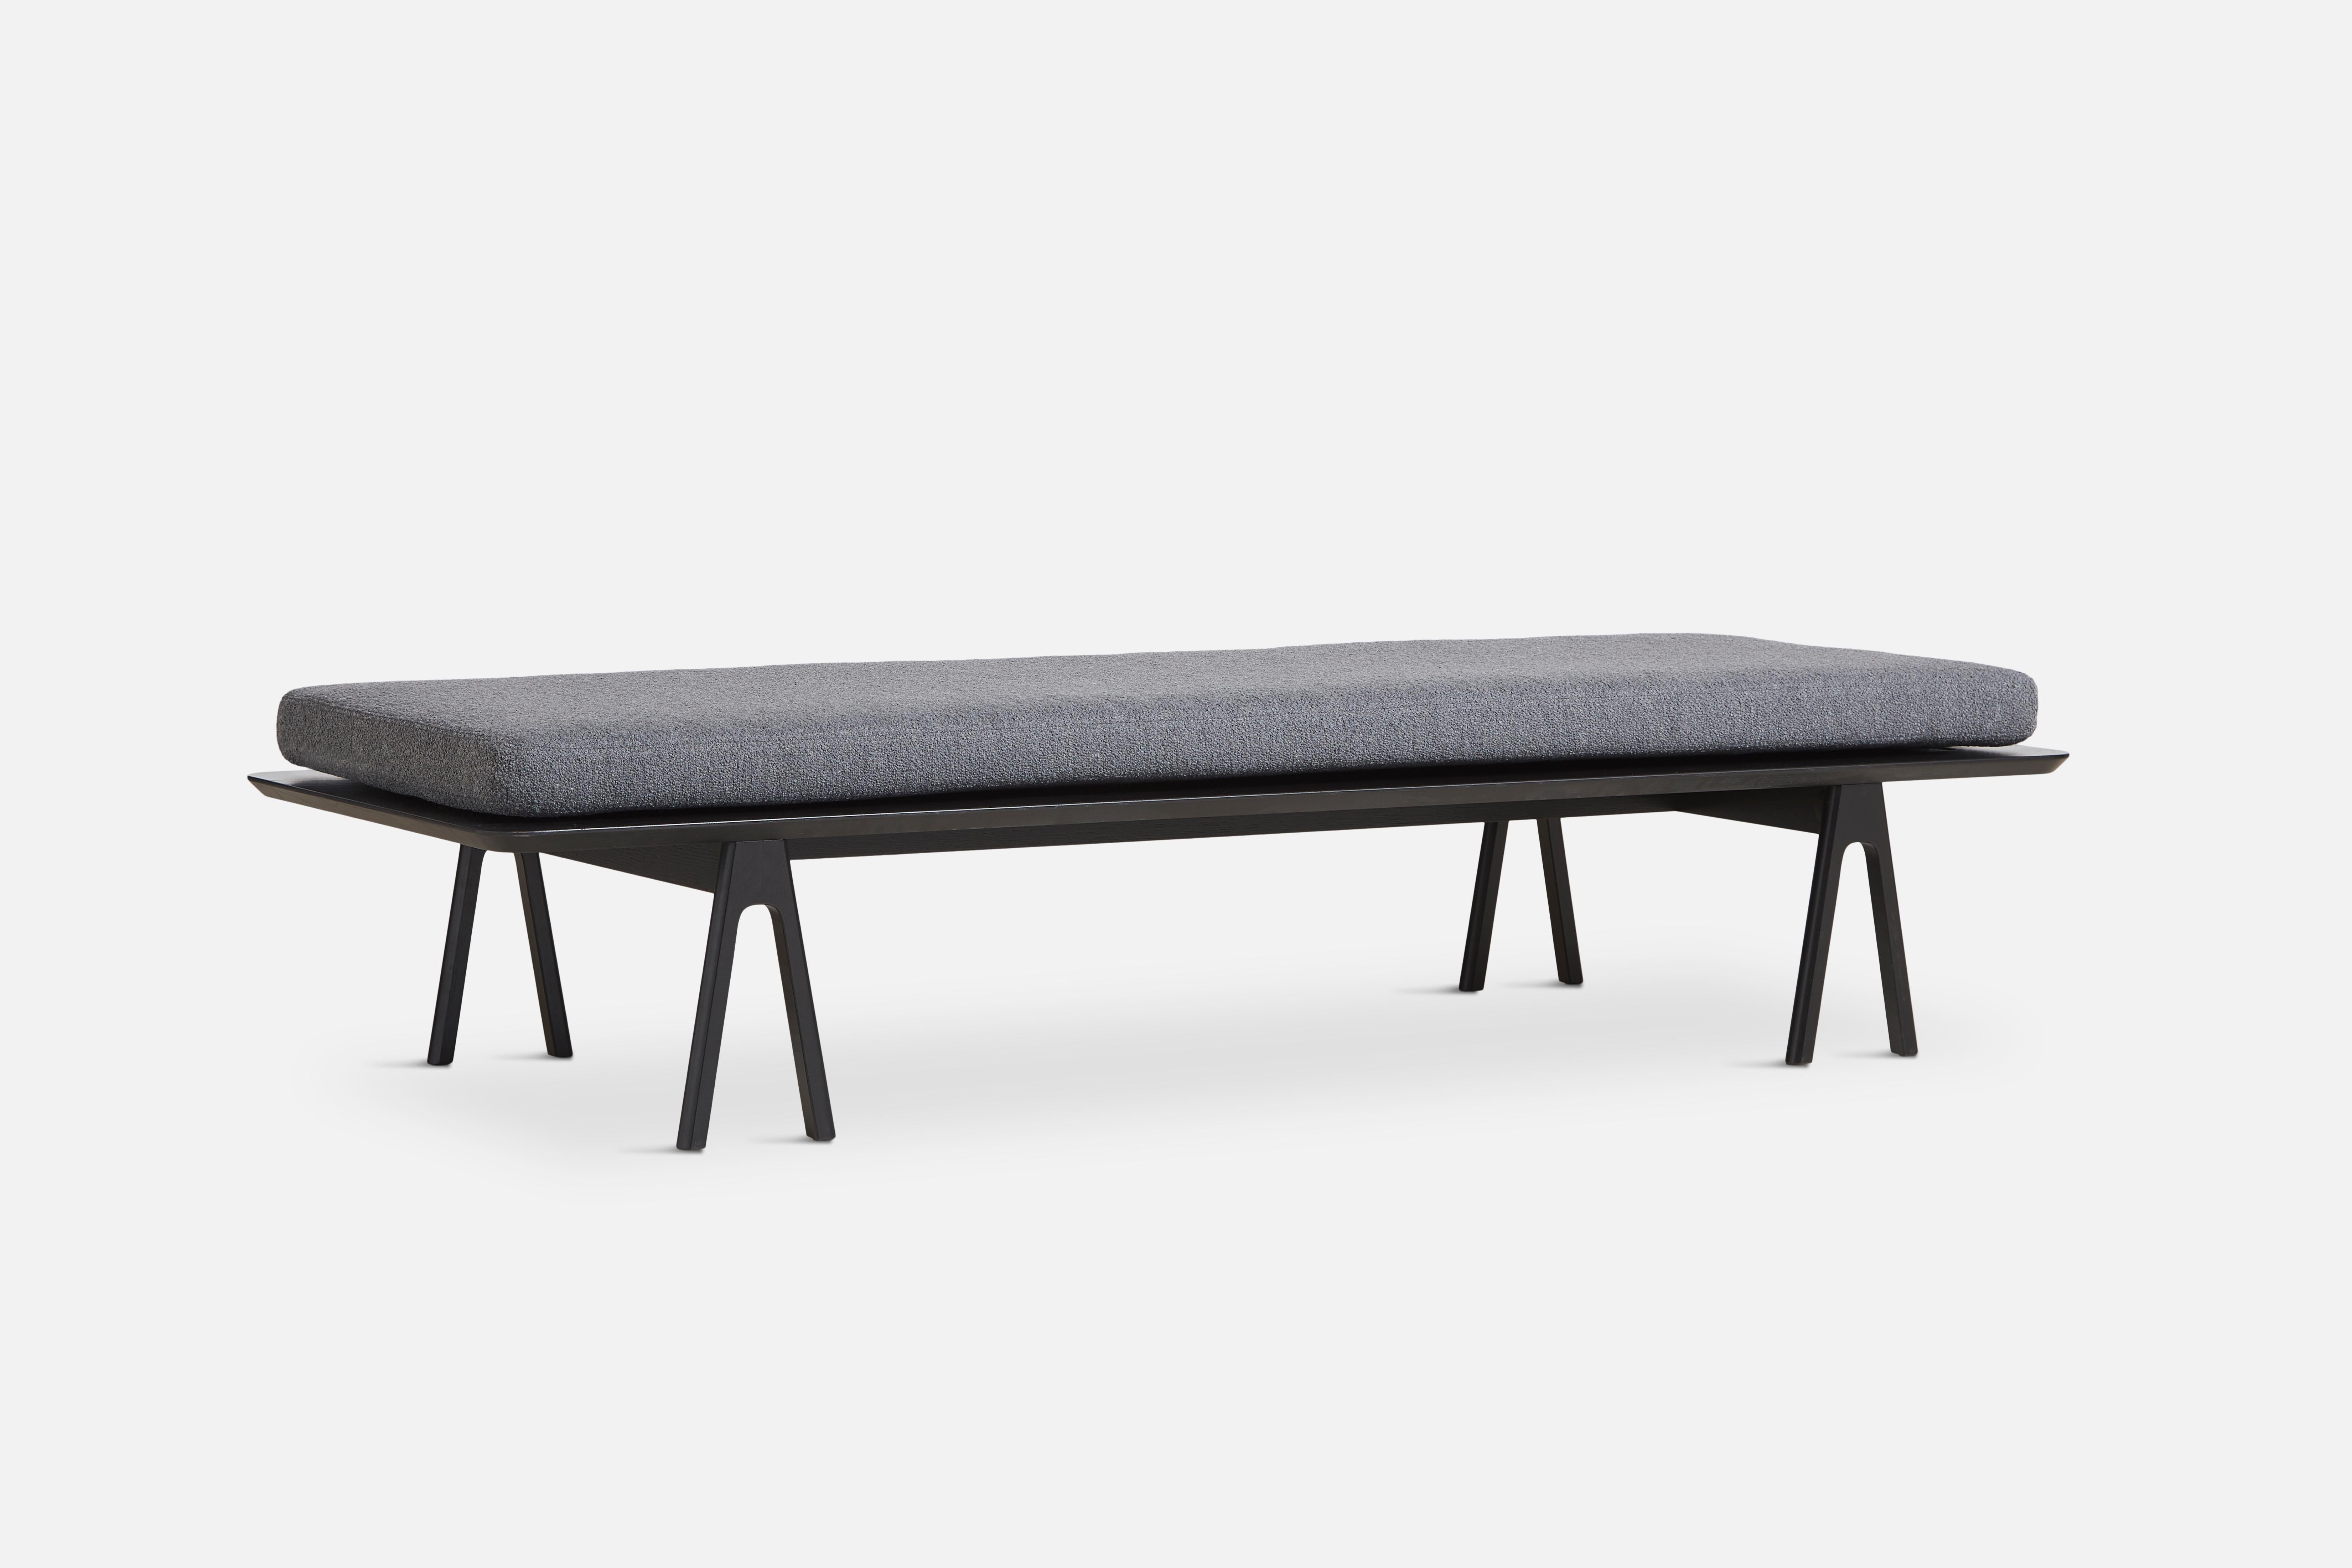 Grey black boucle level daybed by Msds Studio
Materials: Foam, oak, boucle.
Dimensions: D 76.5 x W 190 x H 41 cm

The founders, Mia and Torben Koed, decided to put their 30 years of experience into a new project. It was time for a change and a new